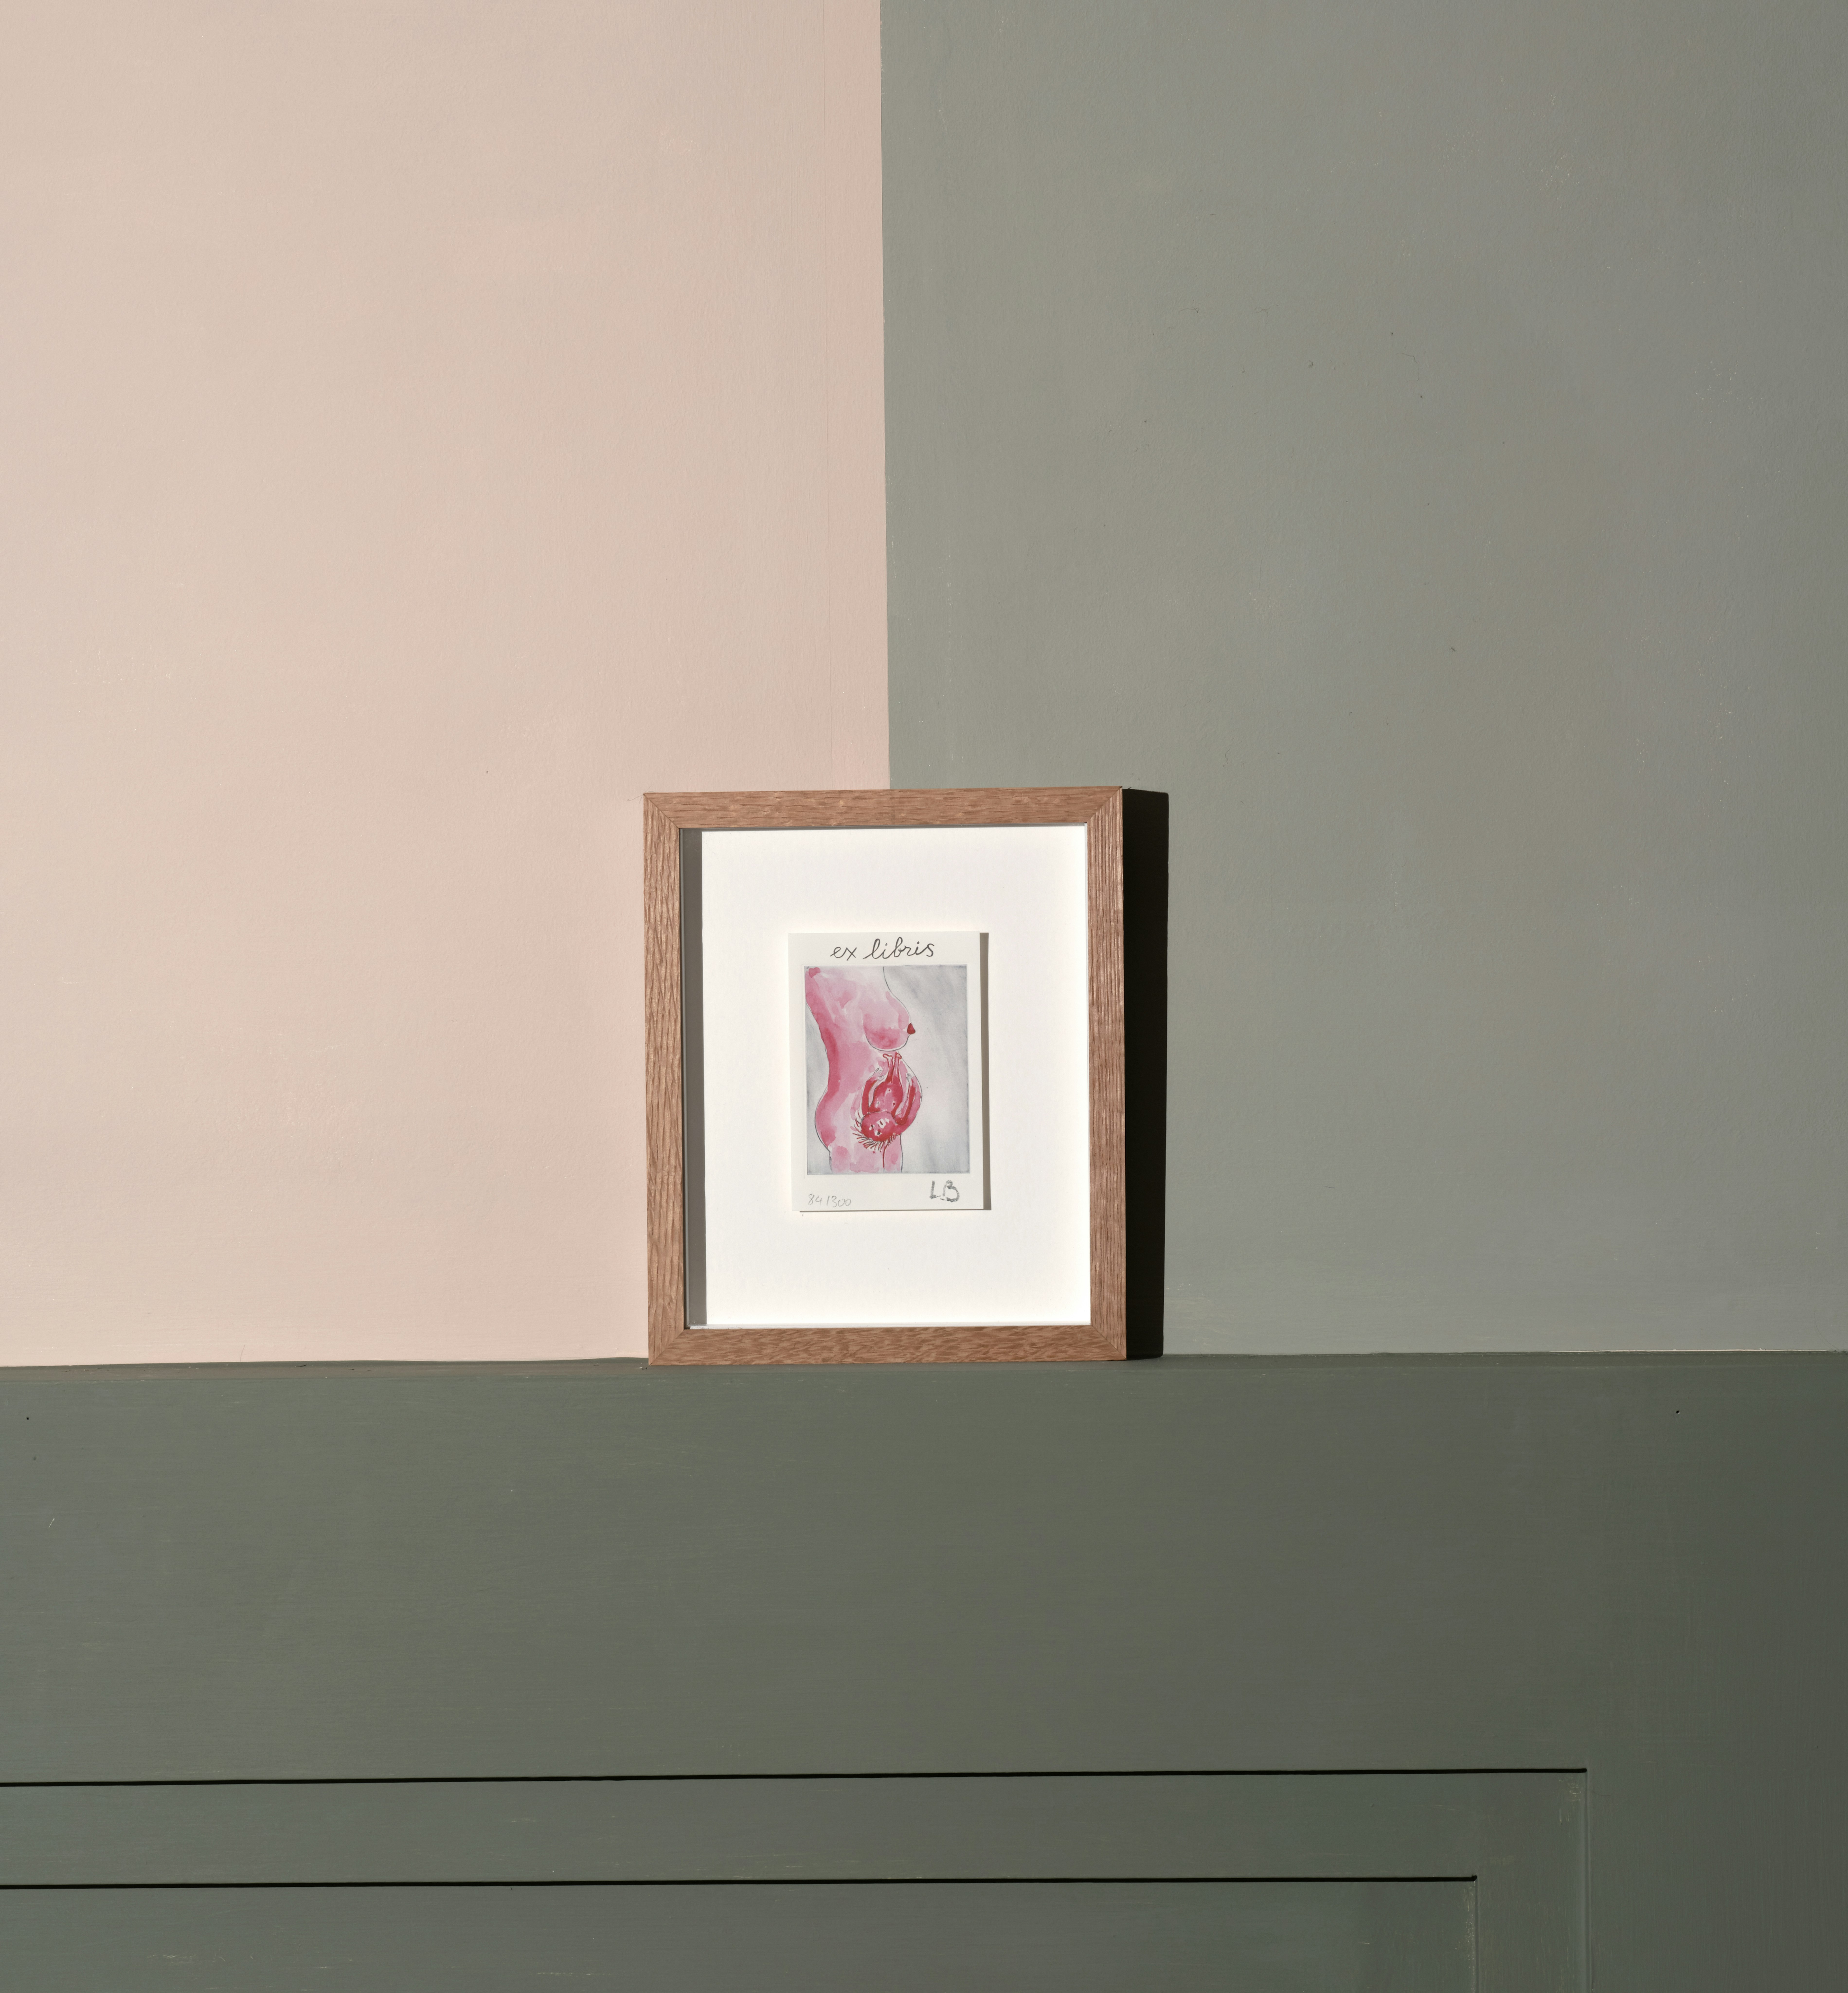 Installation photo of framed lithograph by Louise Bourgeois depicting a cropped image of female pregnant nude in profile, child in womb visible on grey background.